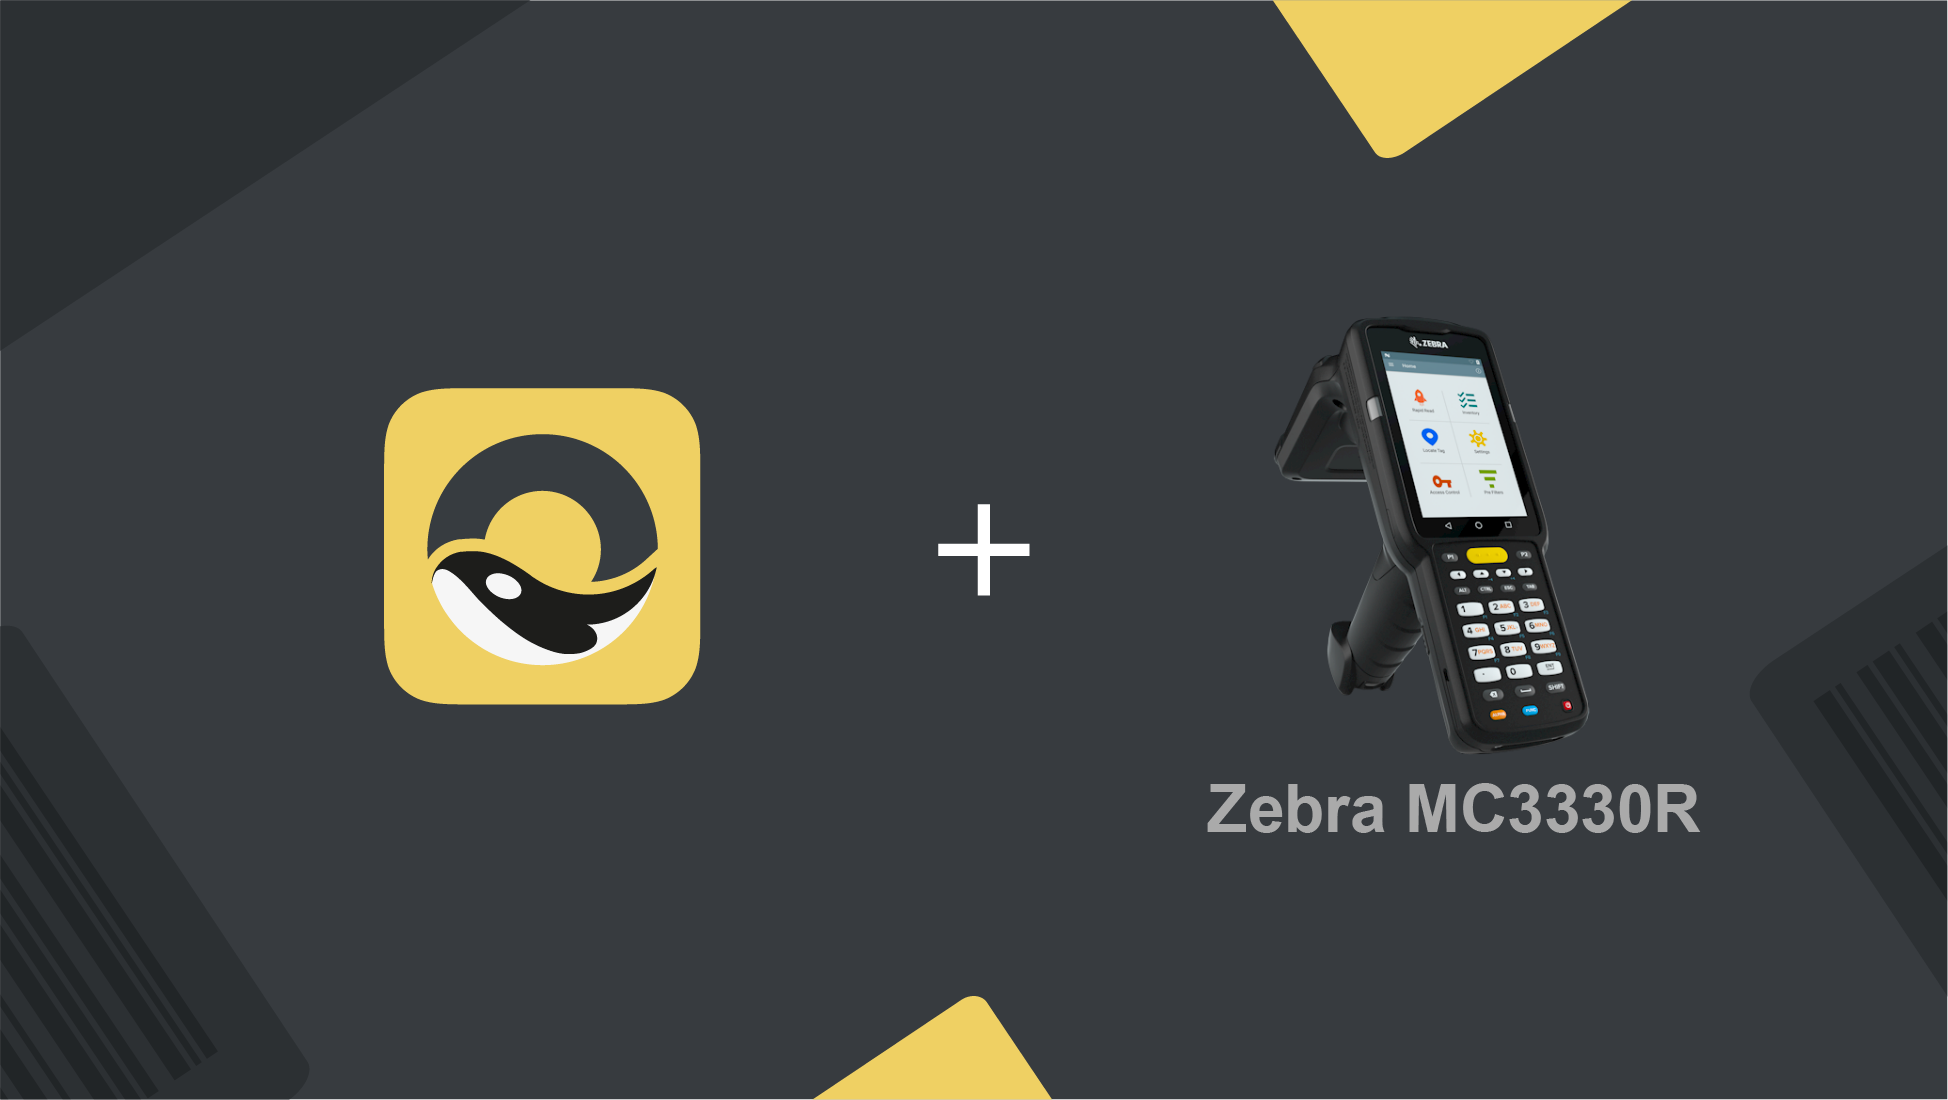 How to use the Zebra MC3330R RFID scanner with Orca Scan